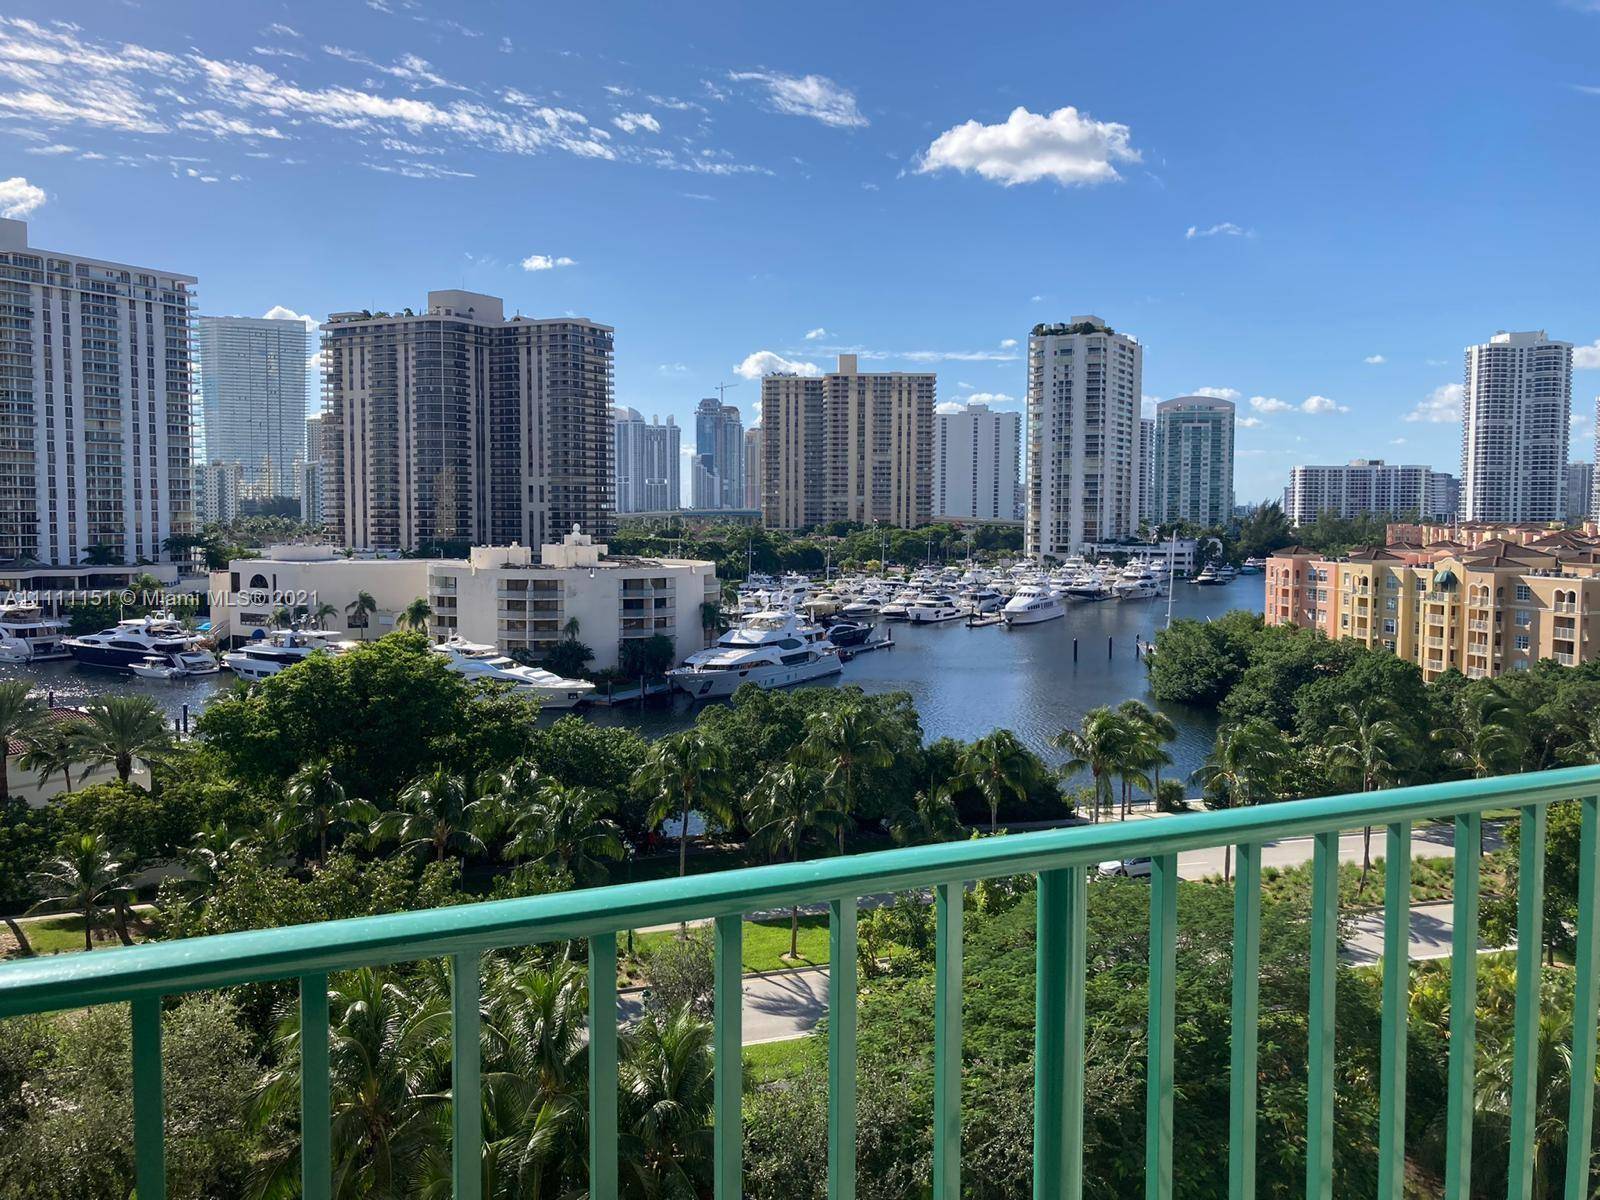 Excellent Location ! ! ! Adjacent to the beautiful Turnberry Golf club, steps from the world famous Aventura mall and a few minutes from Sunny Isles Beaches !